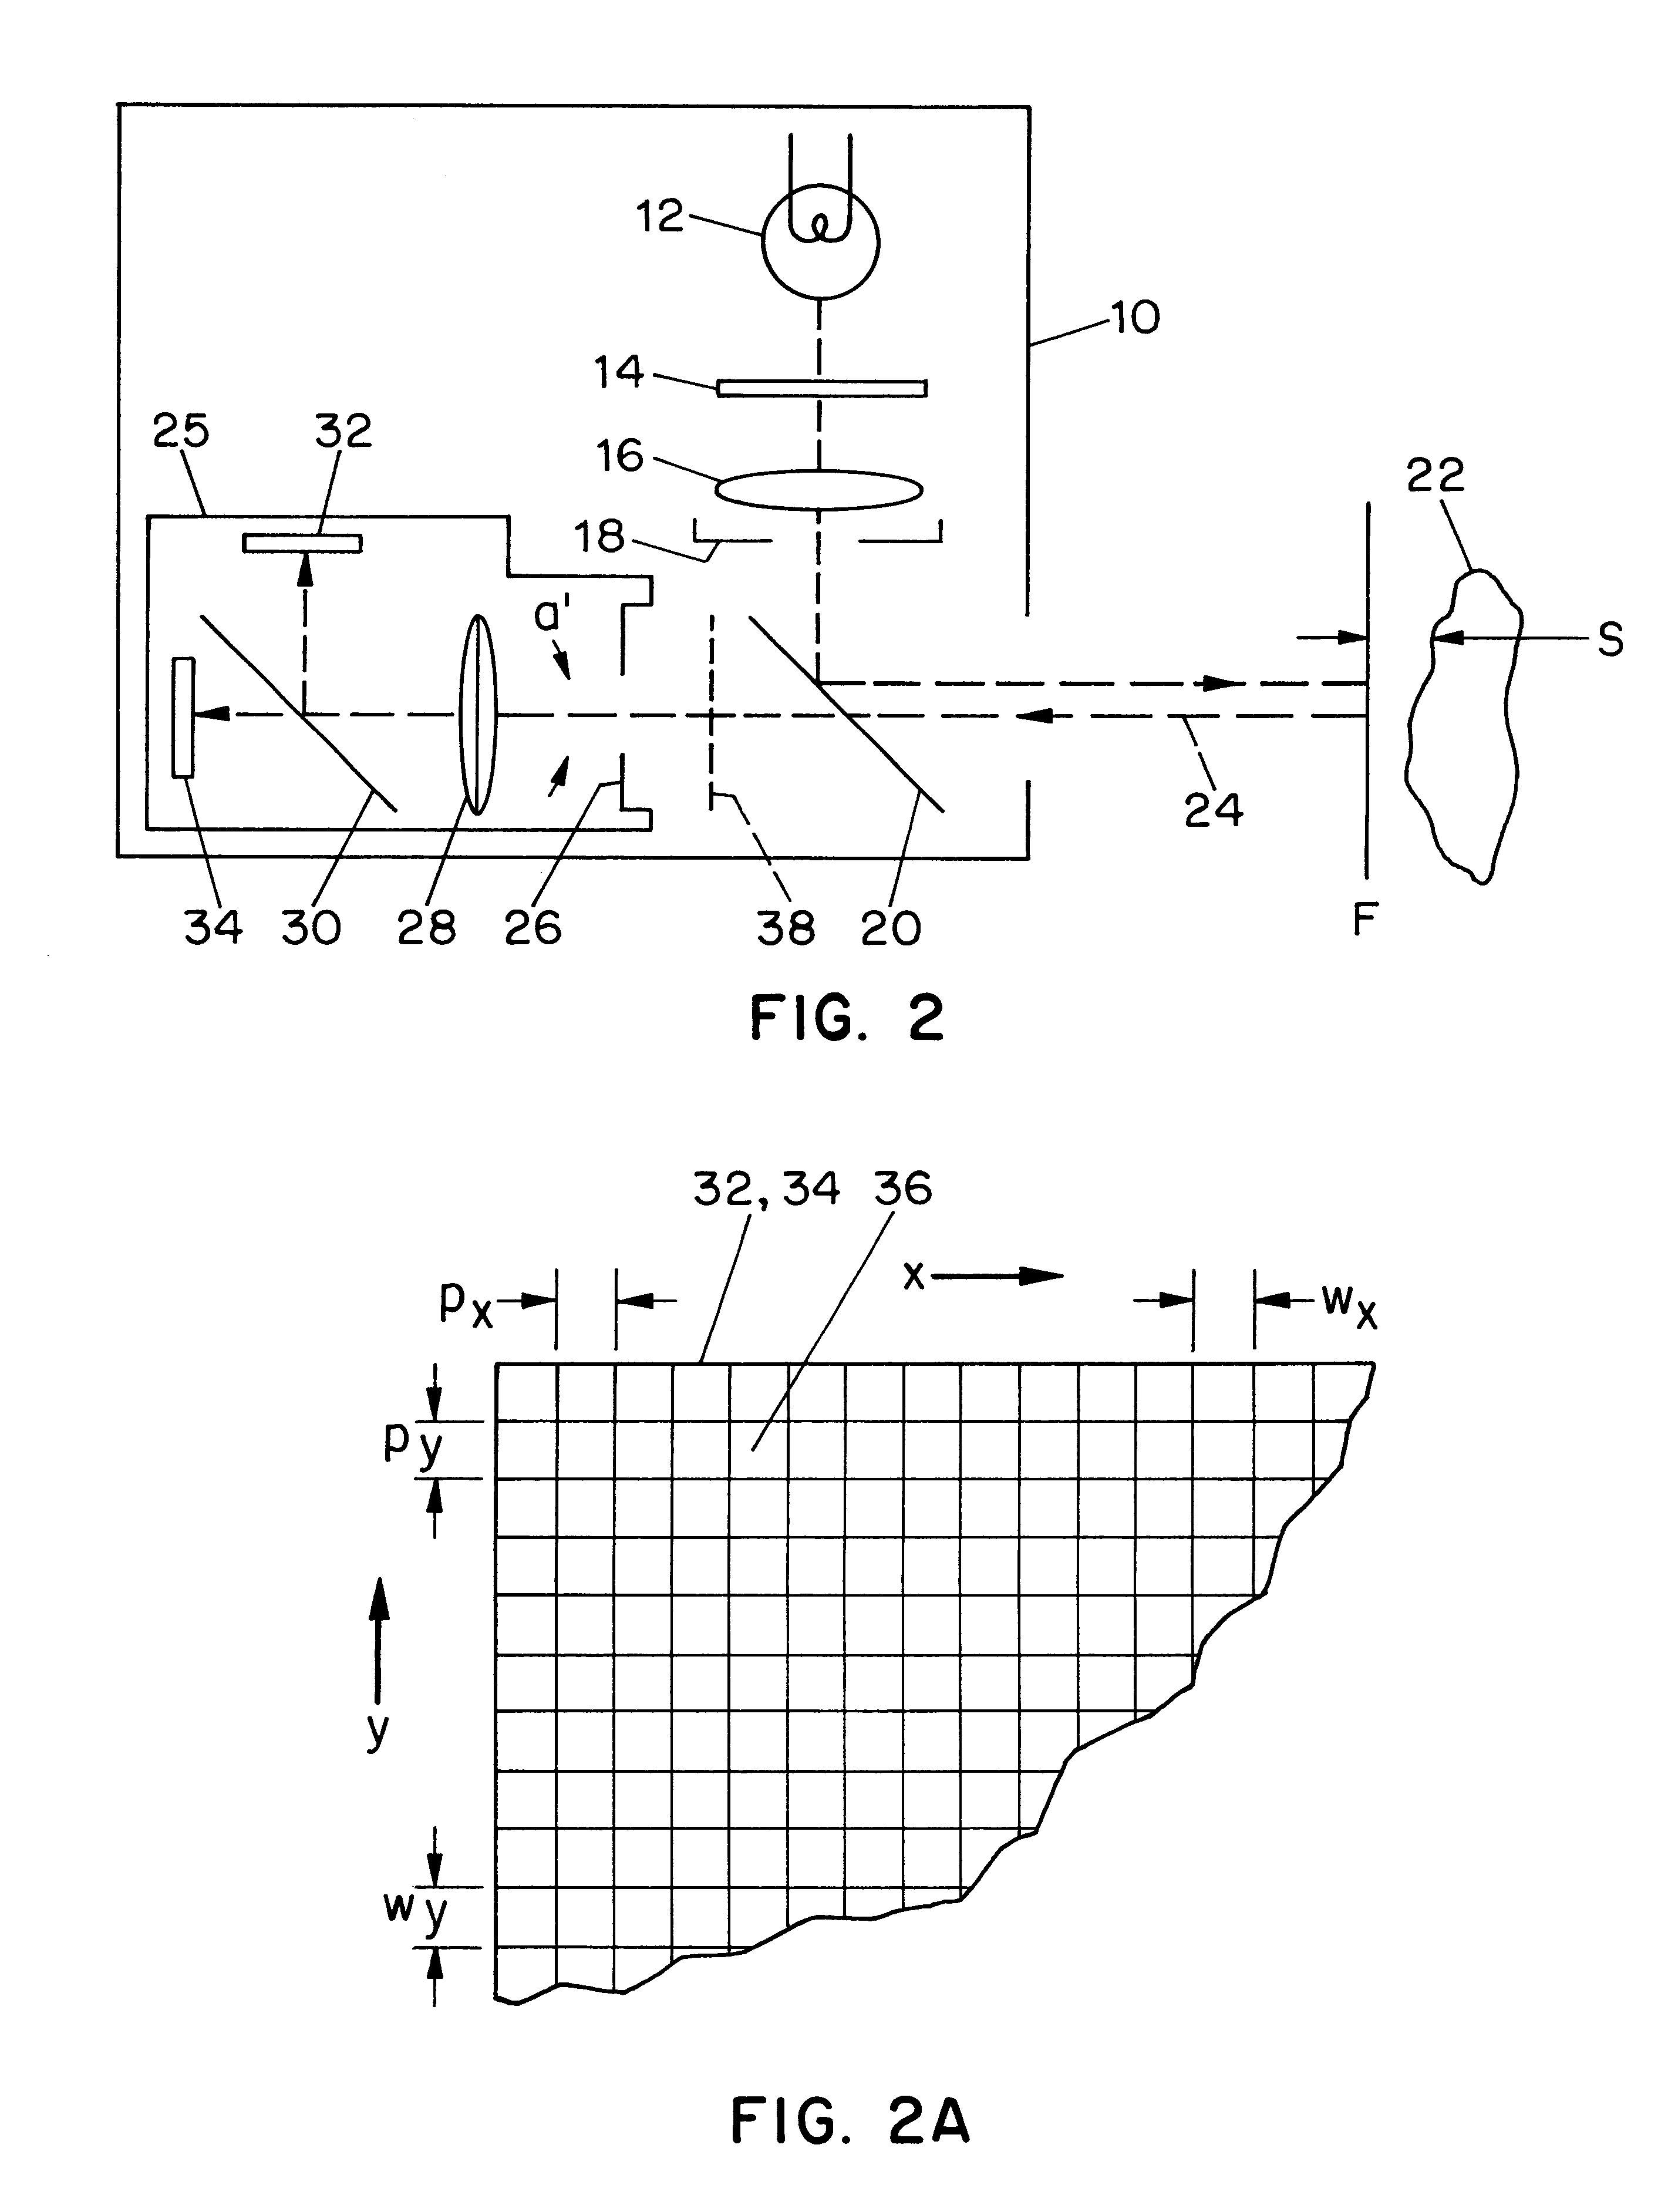 Apparatus and methods for determining the three-dimensional shape of an object using active illumination and relative blurring in two images due to defocus